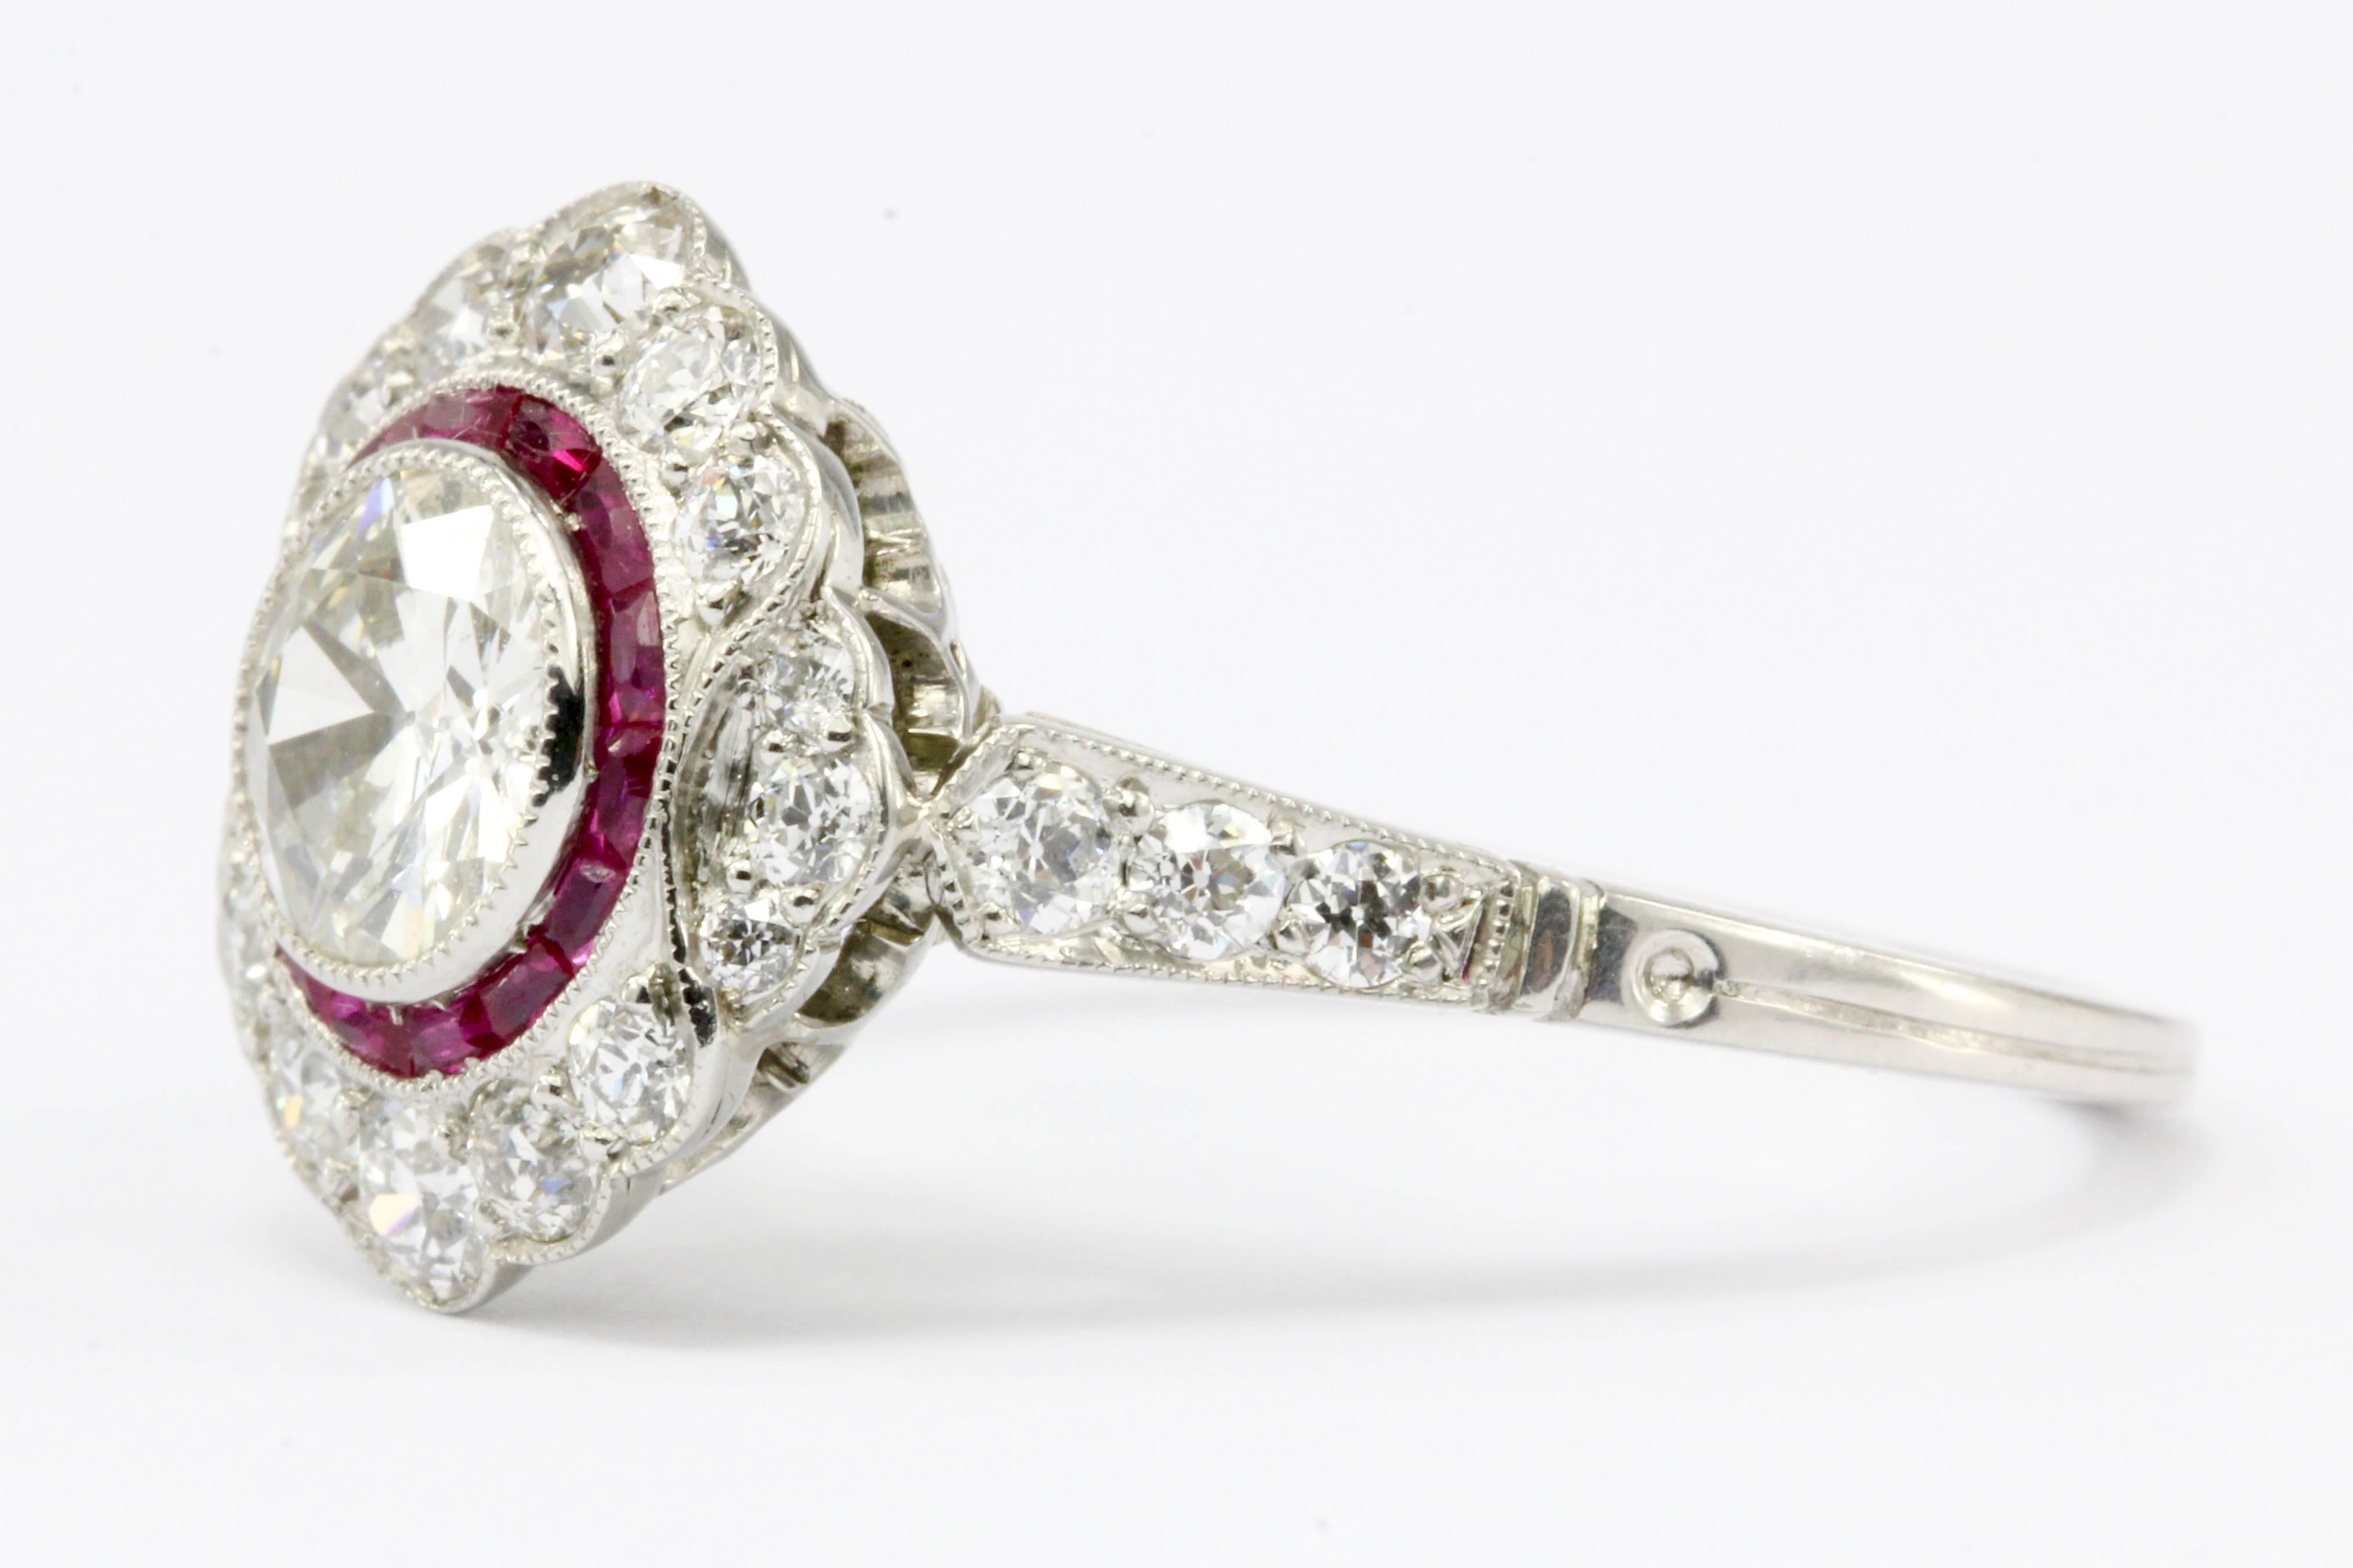 Main Stone: Diamond

Composition: Platinum

Cut: Old European Cut 

Carat: .63

Color: H/I

Clarity: Vs1/2

Accent Stone: Natural Ruby

Carat: .20 CTW

Color: Red

Accent Stone: Diamond

Cut: Old European

Color: G/H

Clarity: VS1-VS2

Ring Size: